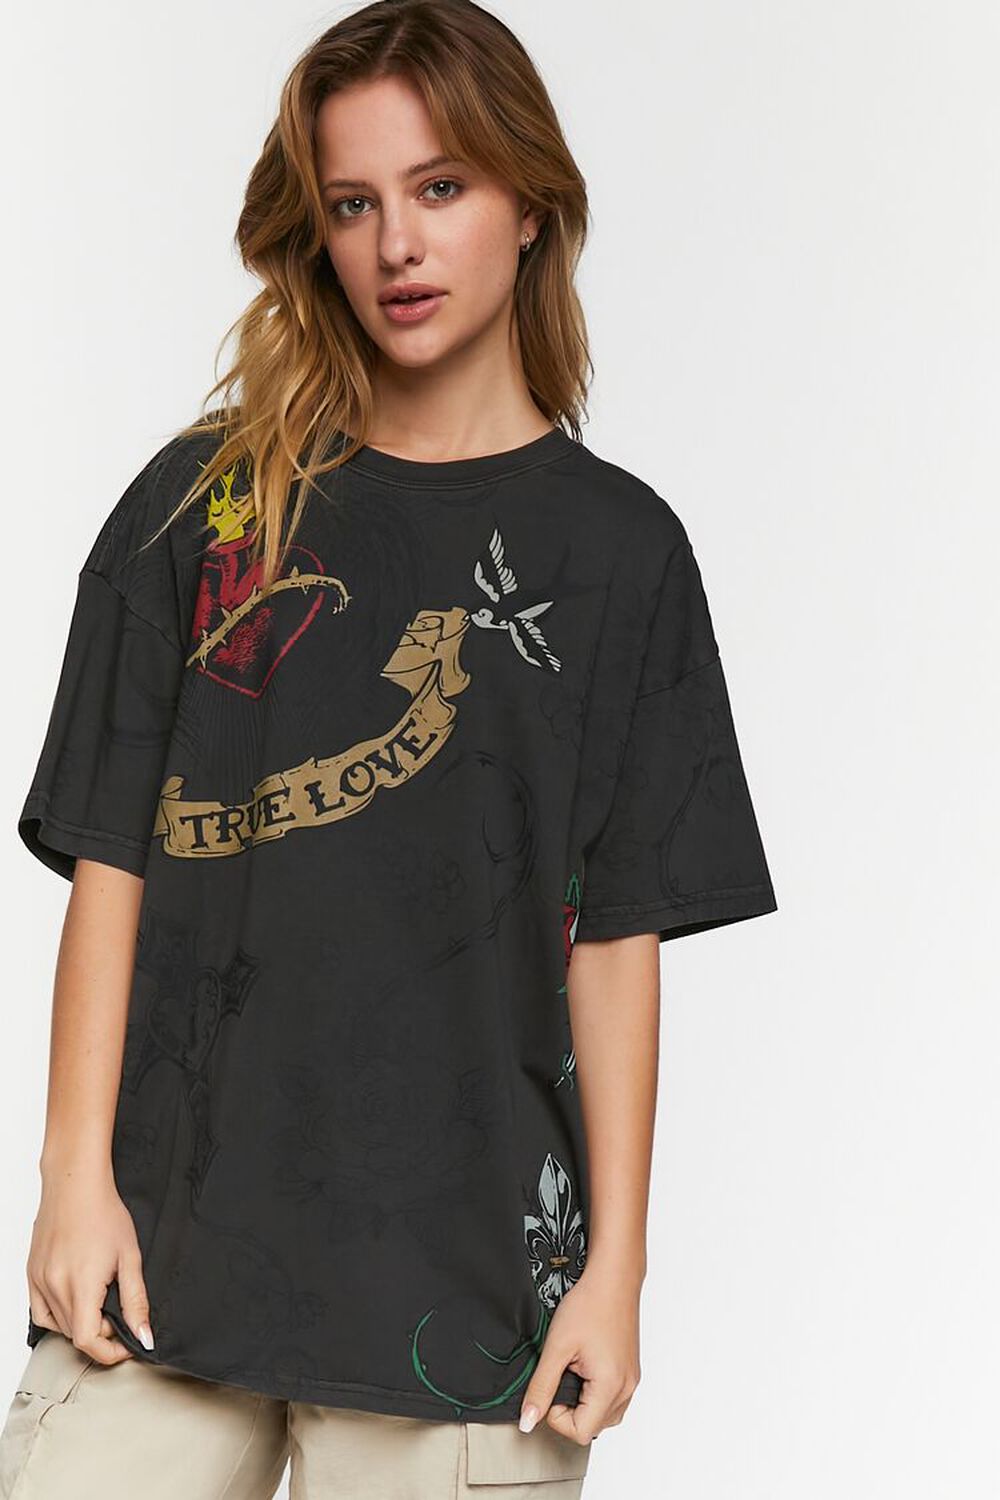 CHARCOAL/MULTI Oversized True Love Graphic Tee, image 1